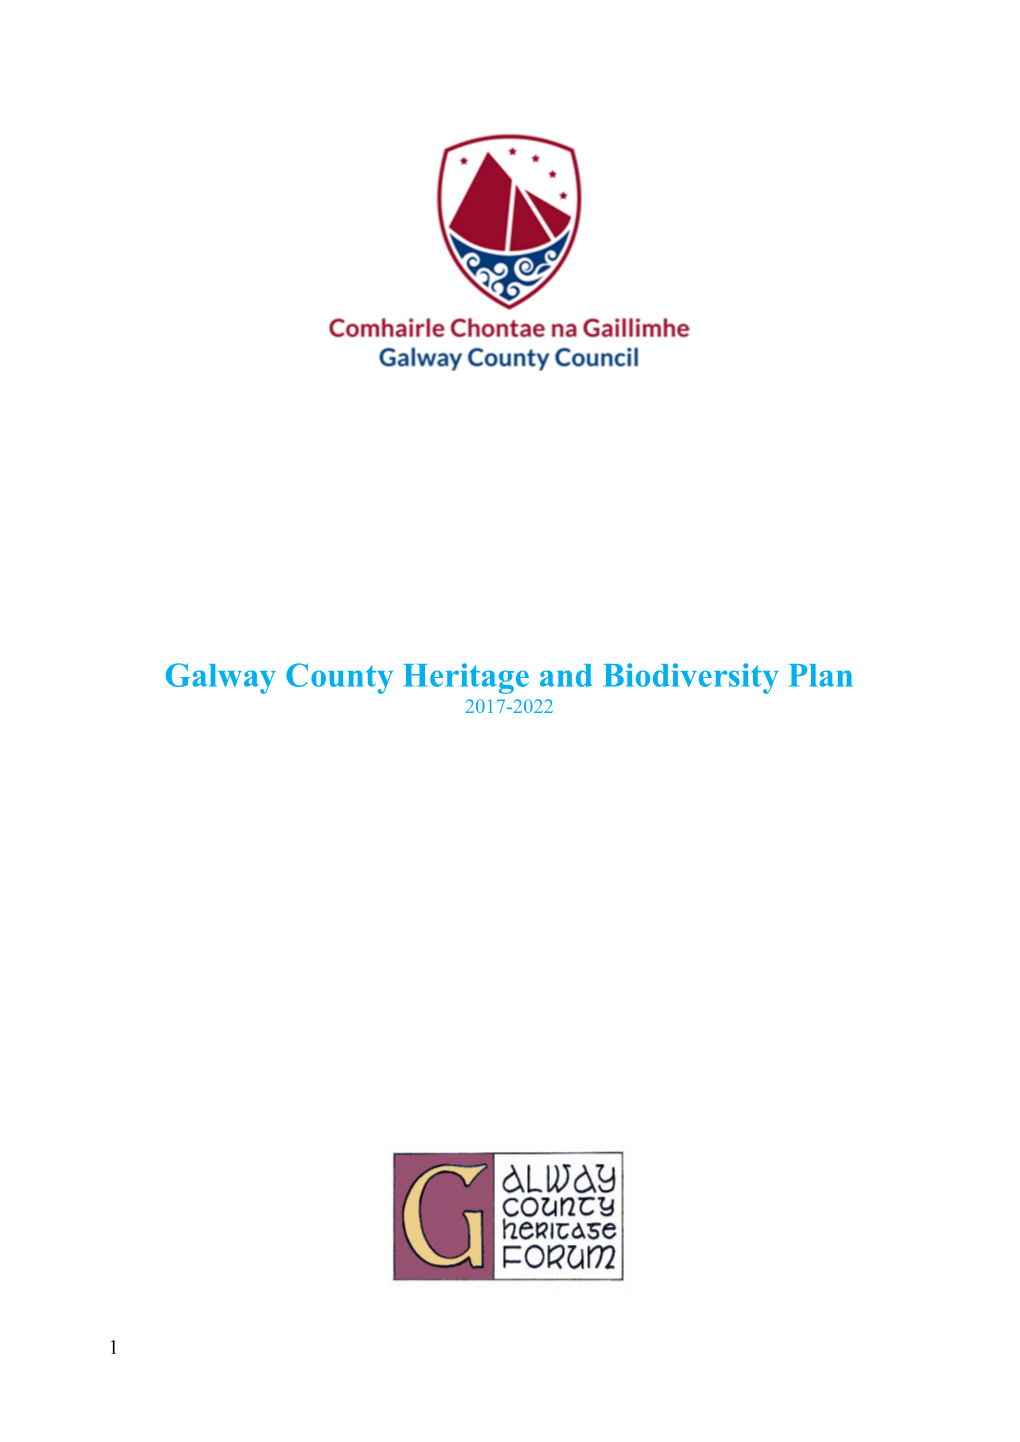 Galway County Heritage and Biodiversity Plan 2017-2022